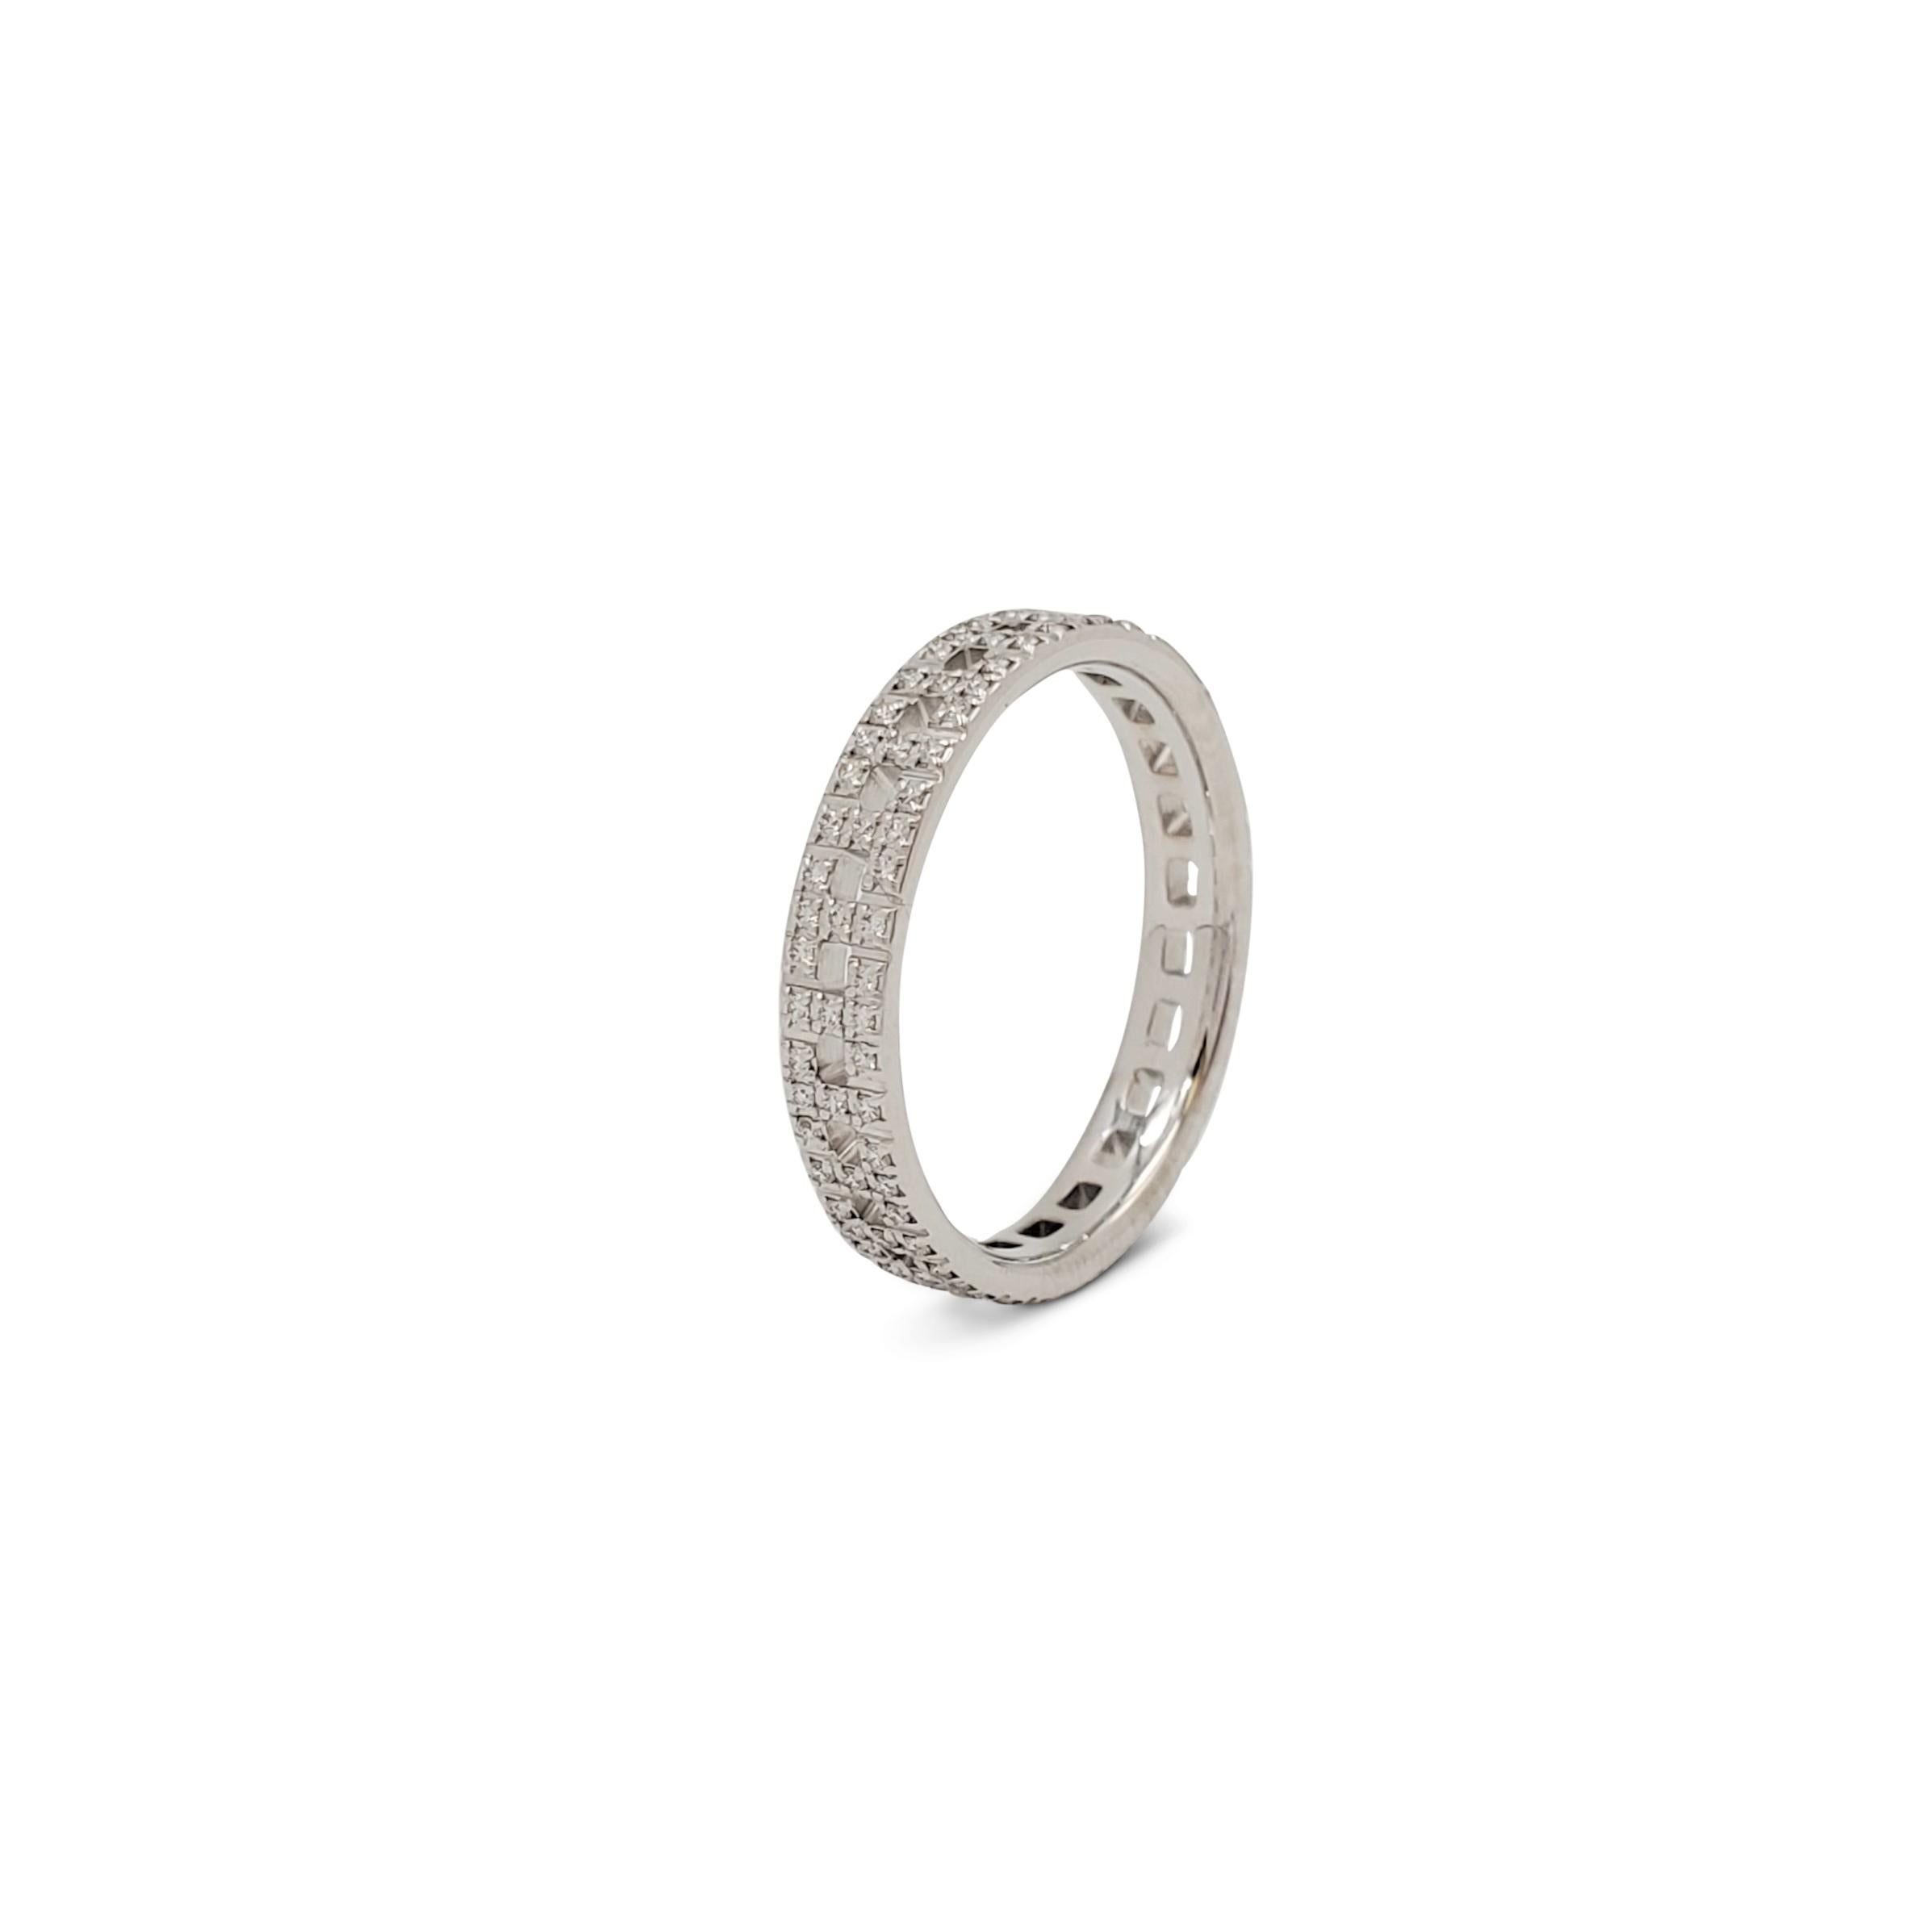 Authentic graphic Tiffany & Co. 'T True Narrow' band ring crafted in 18 karat white gold comprised of alternating links featuring the letter T traced in striking pavé diamonds weighing an estimated 0.23 carats total weight (E-F, VS). Signed Tiffany